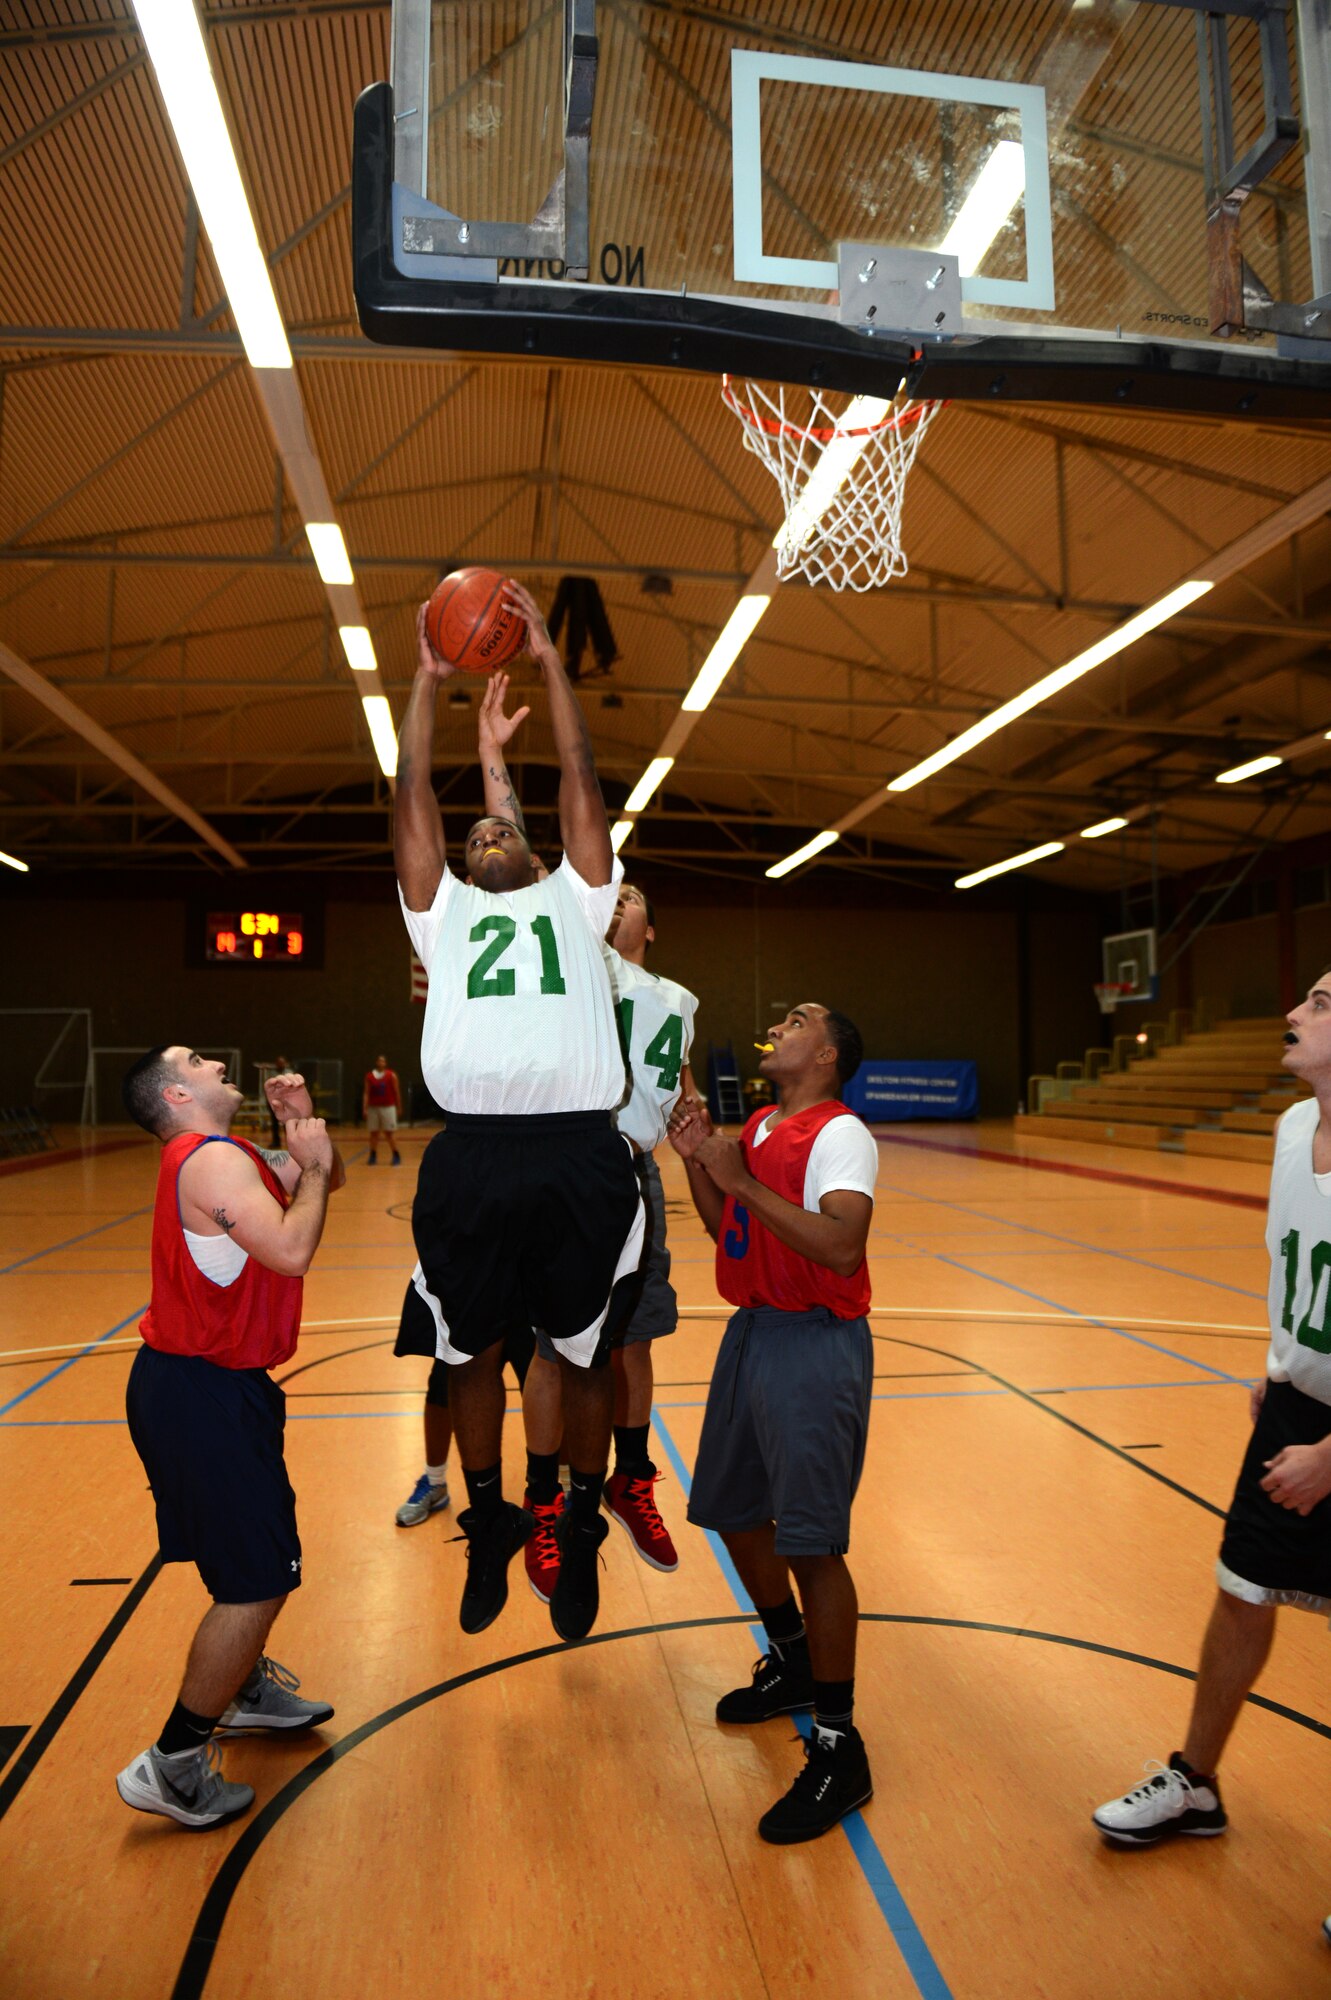 SPANGDAHLEM AIR BASE, Germany – Aramis Williams, 52nd Civil Engineer Squadron, rebounds the ball during a basketball game against the 52nd Communications Squadron inside the Skelton Memorial Fitness Center Jan. 8, 2013. Playoffs for intramural basketball will begin in February. (U.S. Air Force photo by Airman 1st Class Gustavo Castillo/Released)